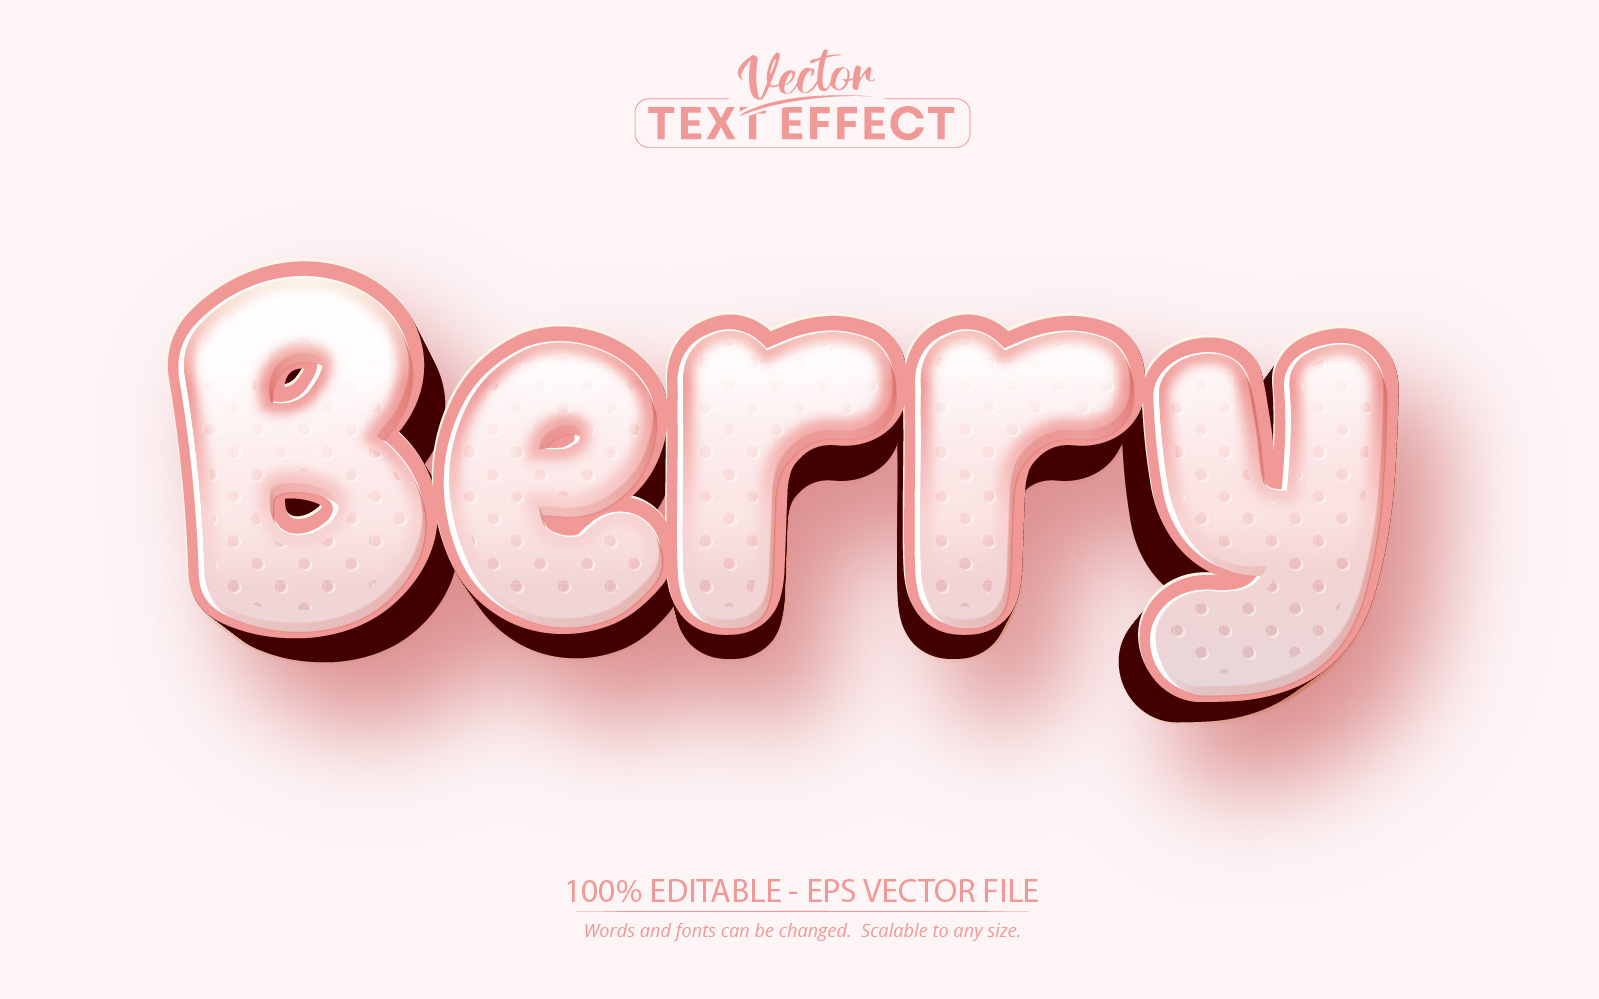 Berry - Editable Text Effect, Pink Cartoon Text Style, Graphics Illustration